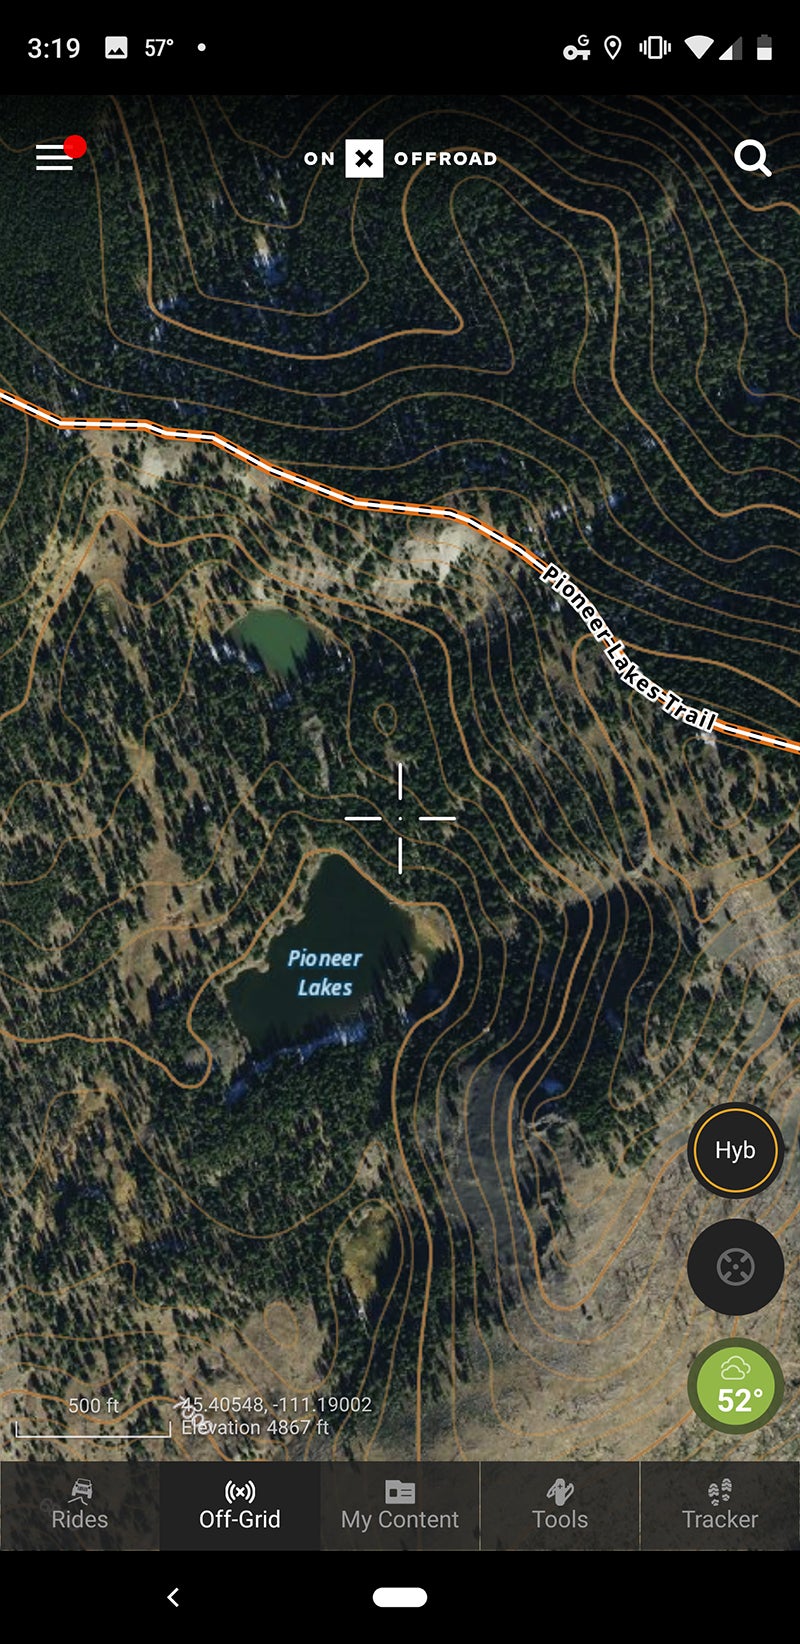 Exploring digitally, I can see this high-elevation lake. That looks like a cool place to check out!